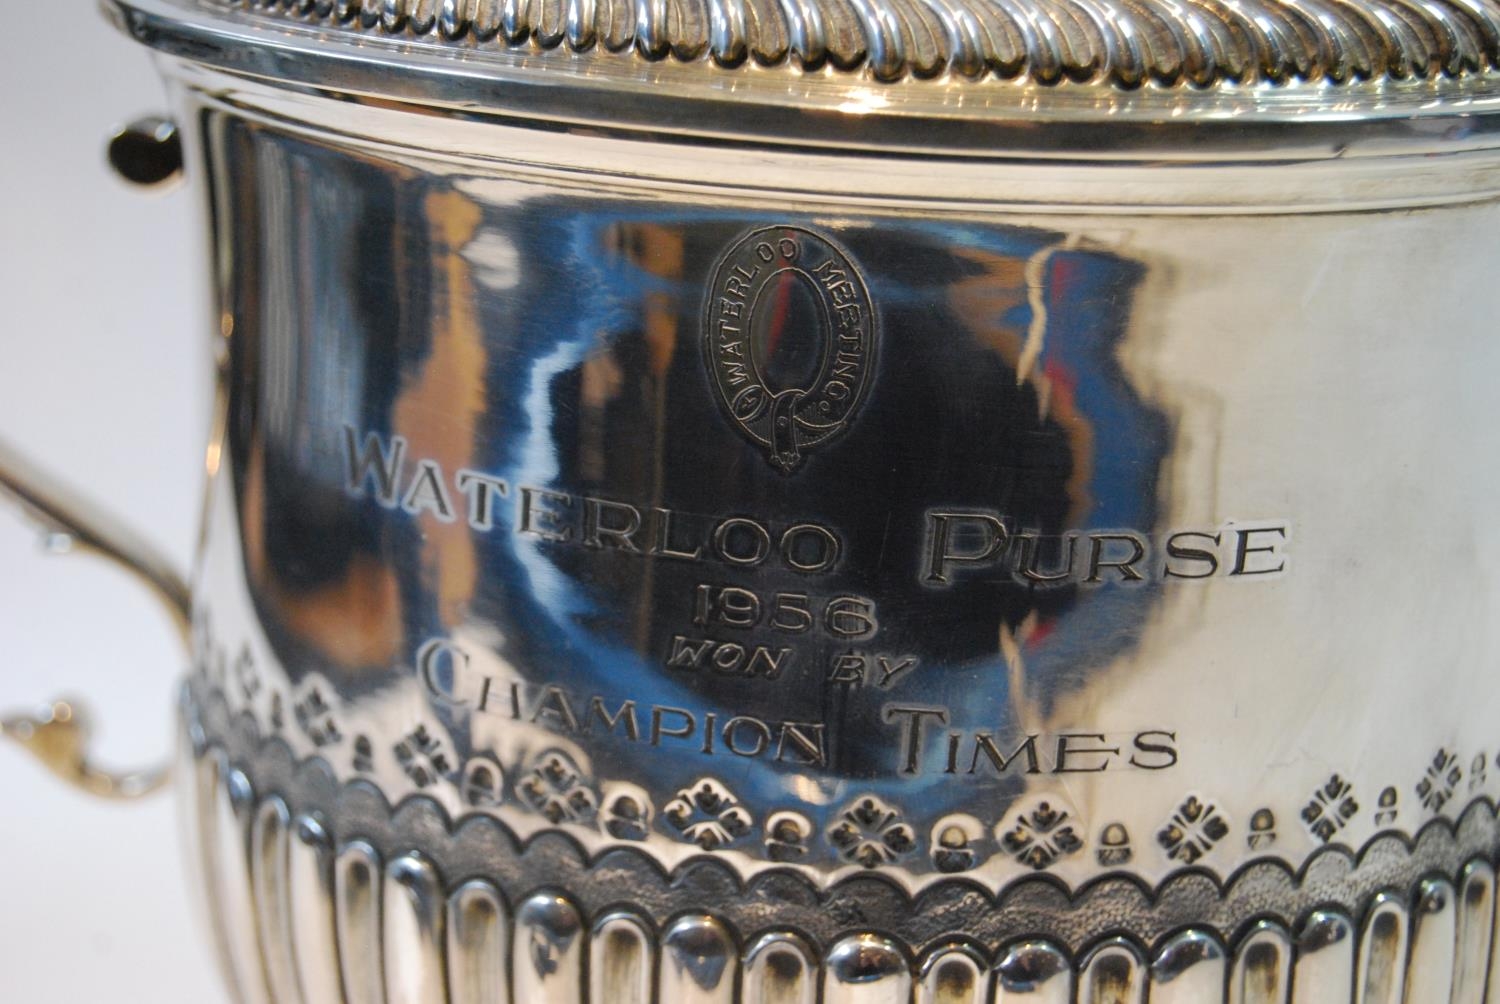 Silver caudle cup and cover of late 17th century style, 'Waterloo Meeting 1956', by CS Harris & Co., - Image 2 of 4